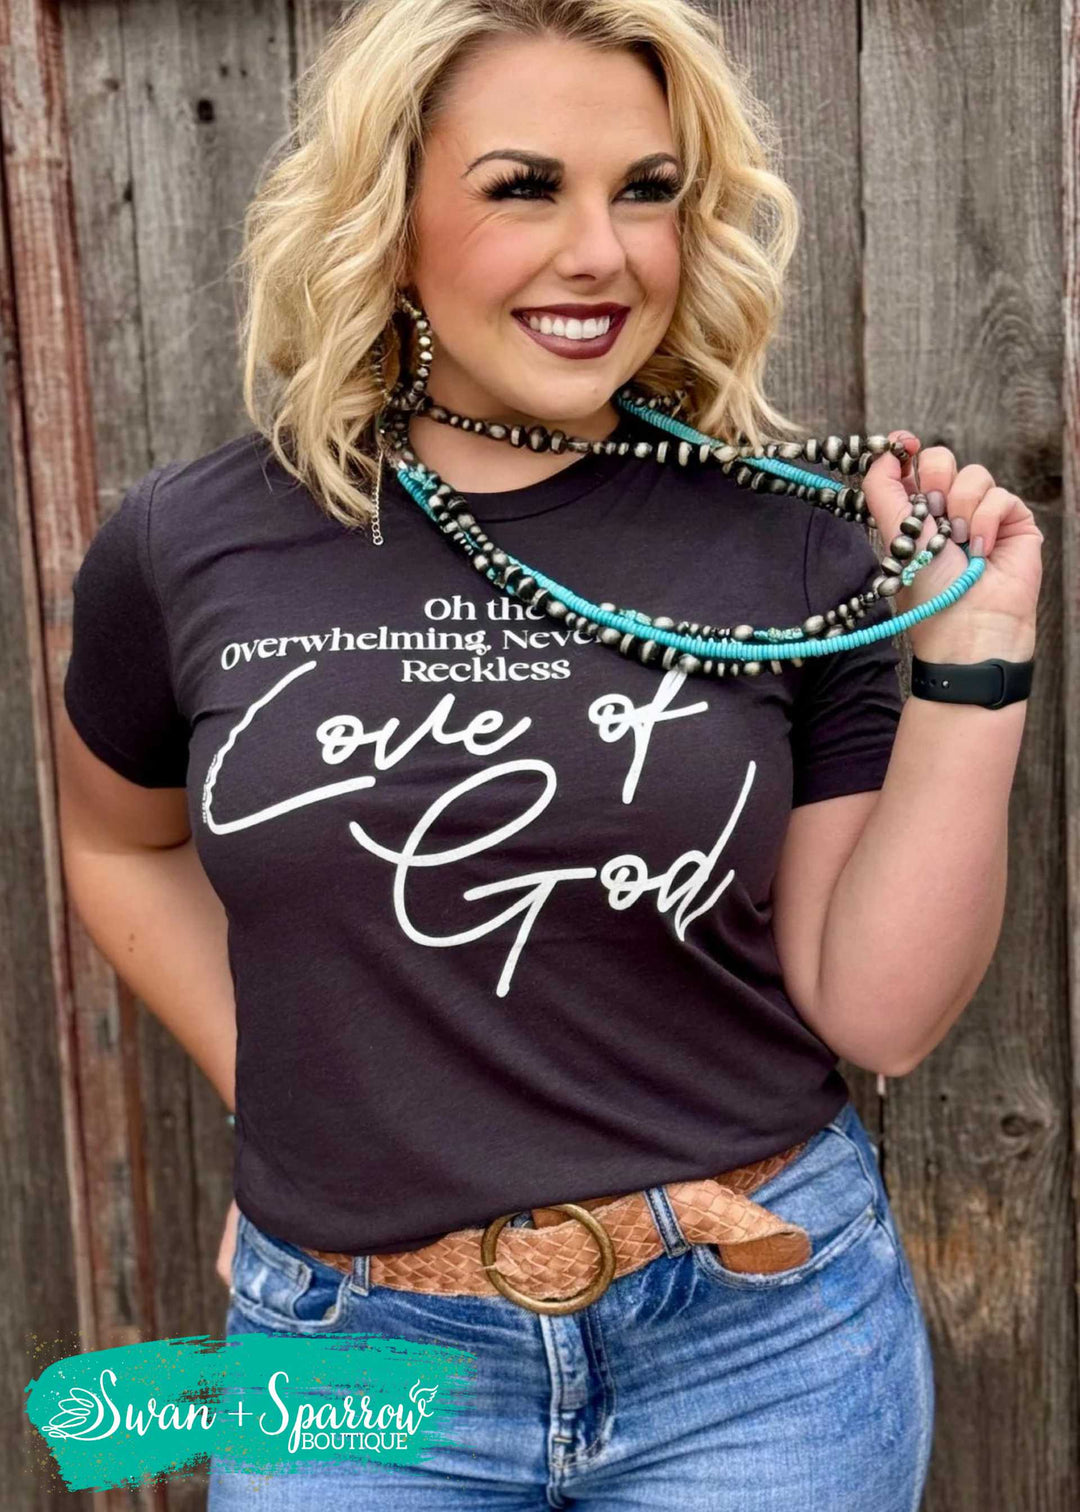 Reckless Love Of God Tee